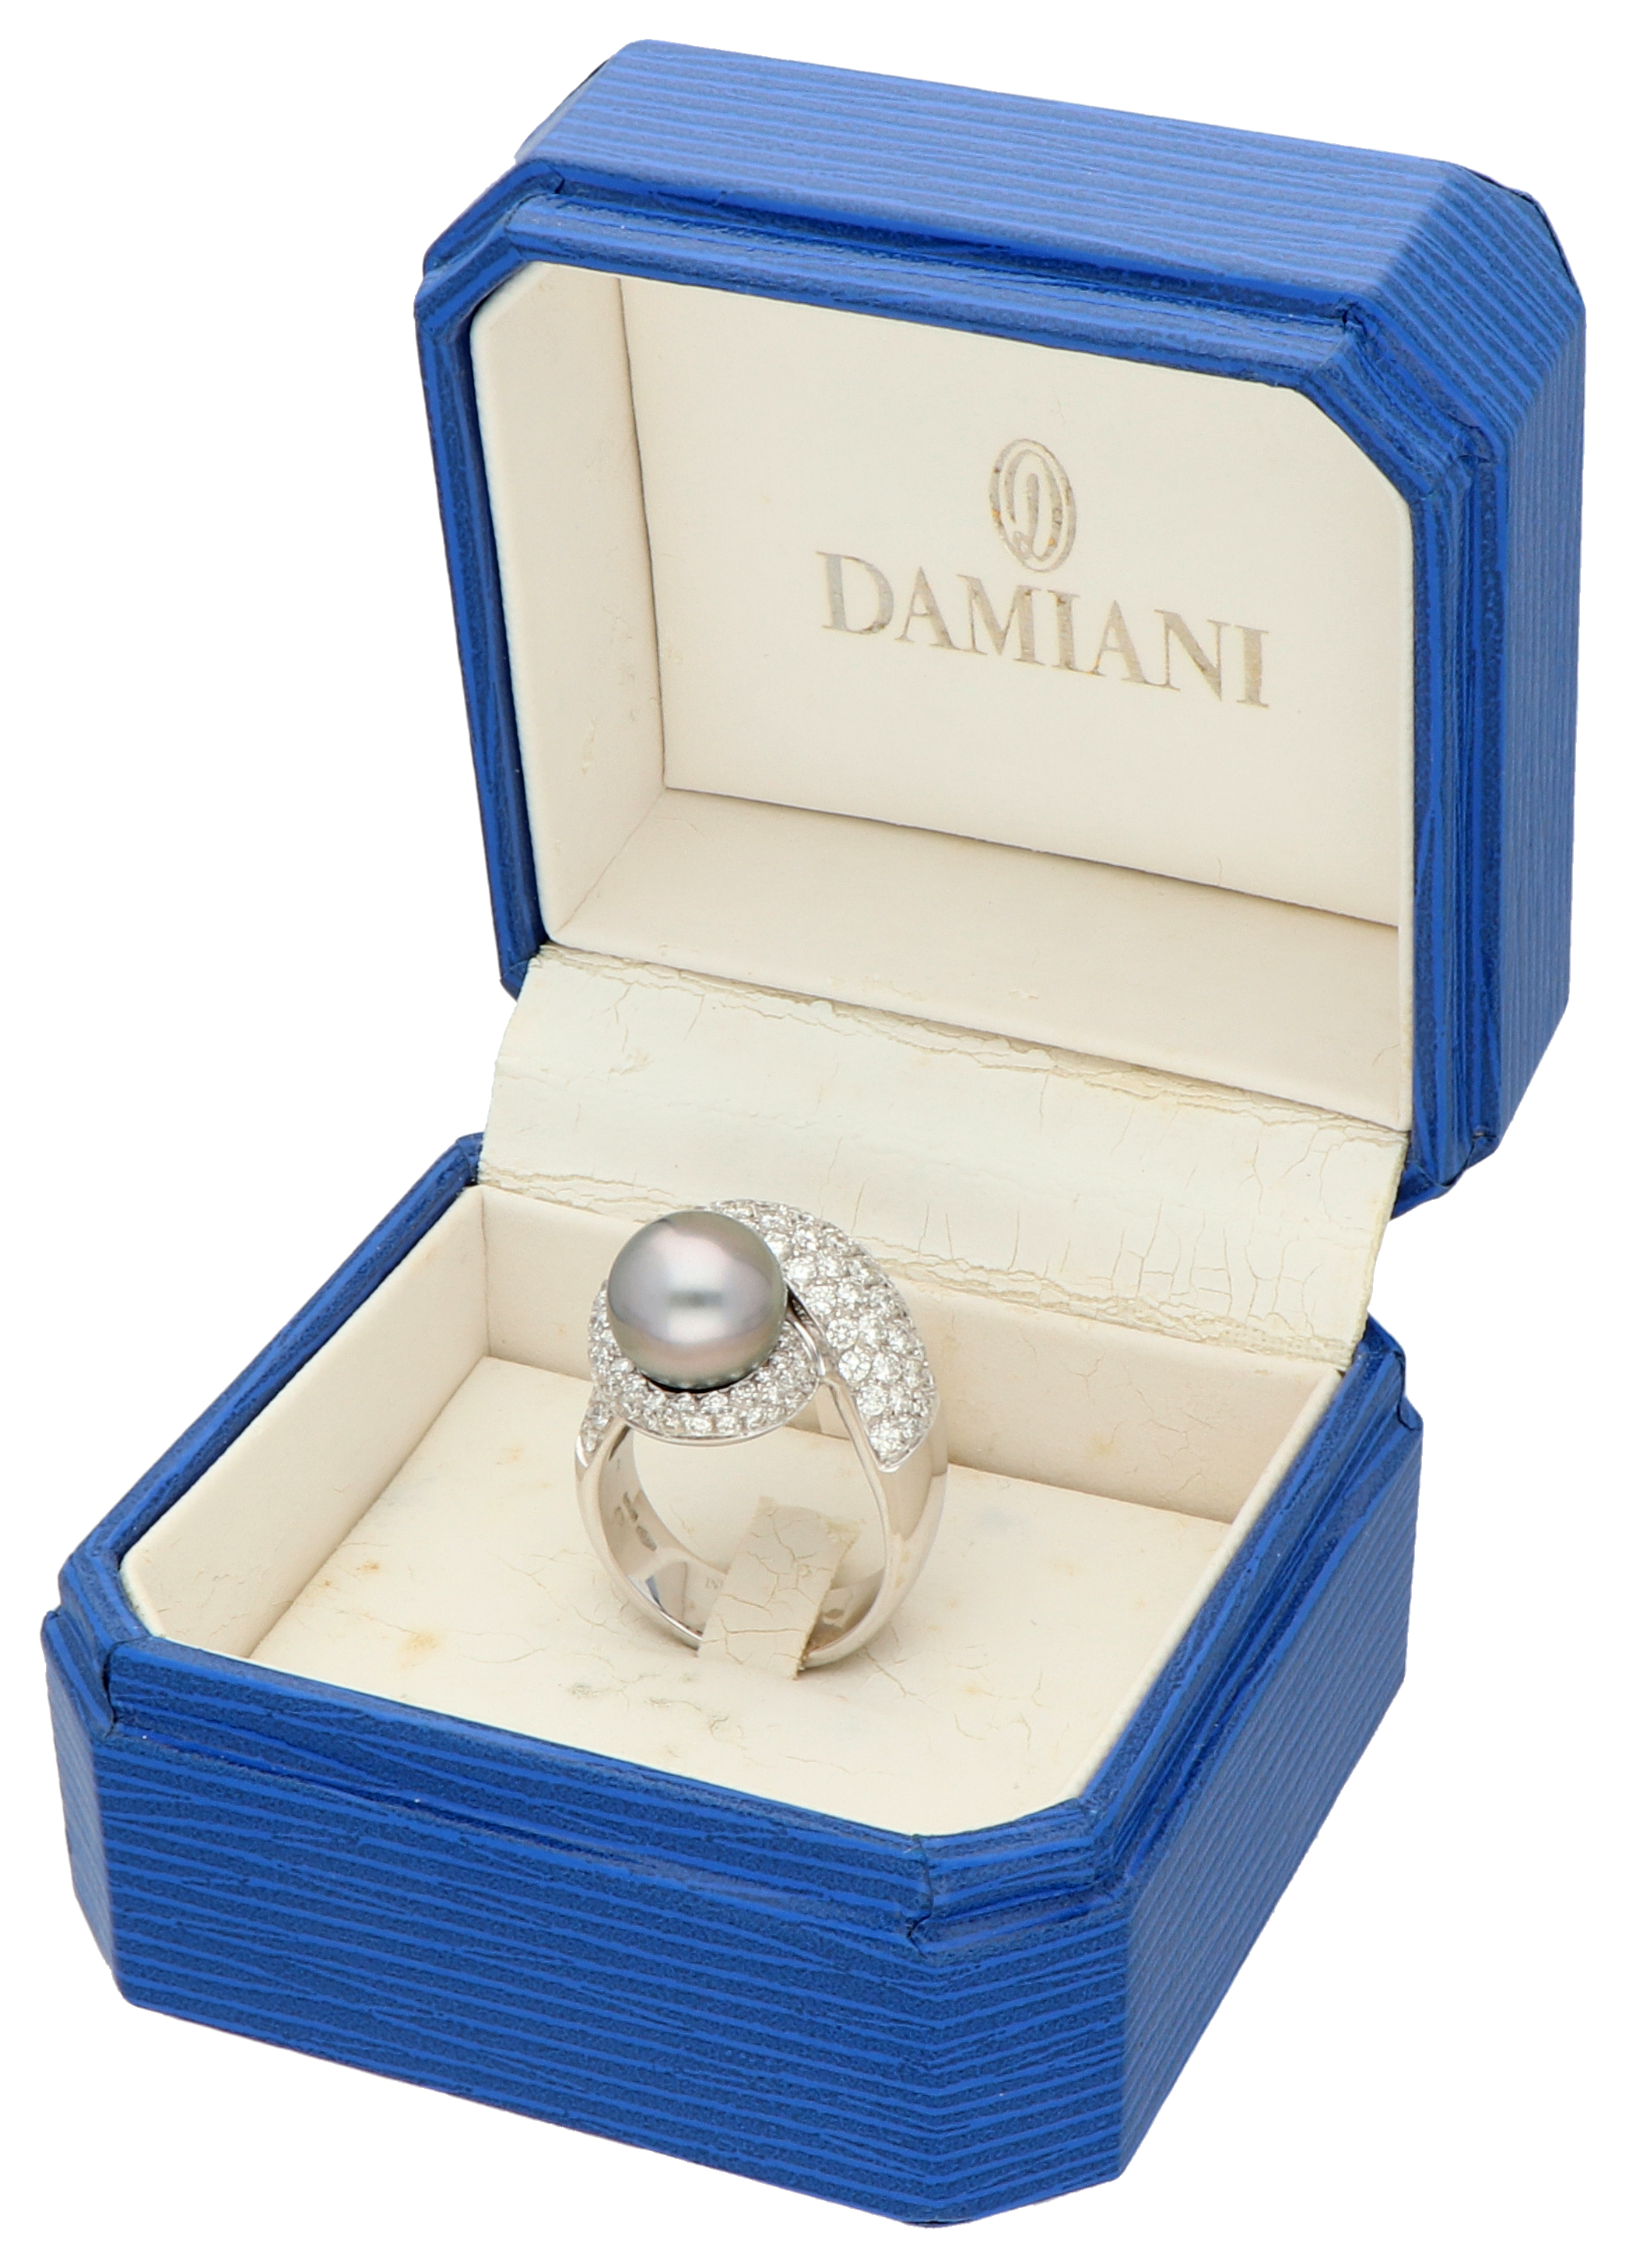 No Reserve - Damiani 18K White gold ring set with cultivated pearl and diamond. - Image 5 of 5